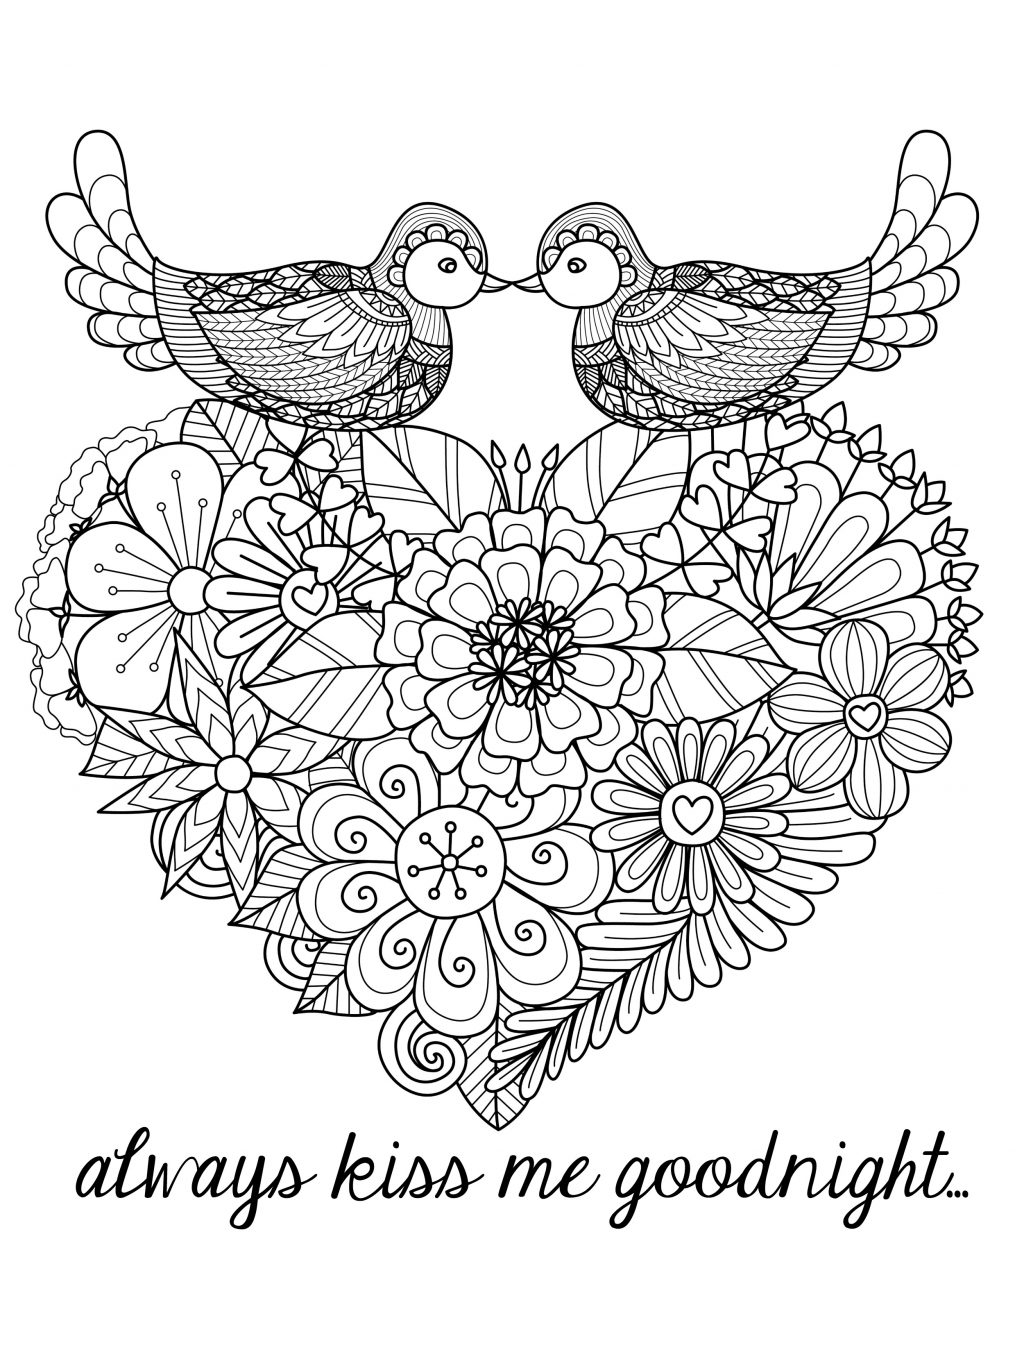 Valentines Day Coloring Page Coloring Page Kiss Me Goodnight Valentines Day Coloring Pages For